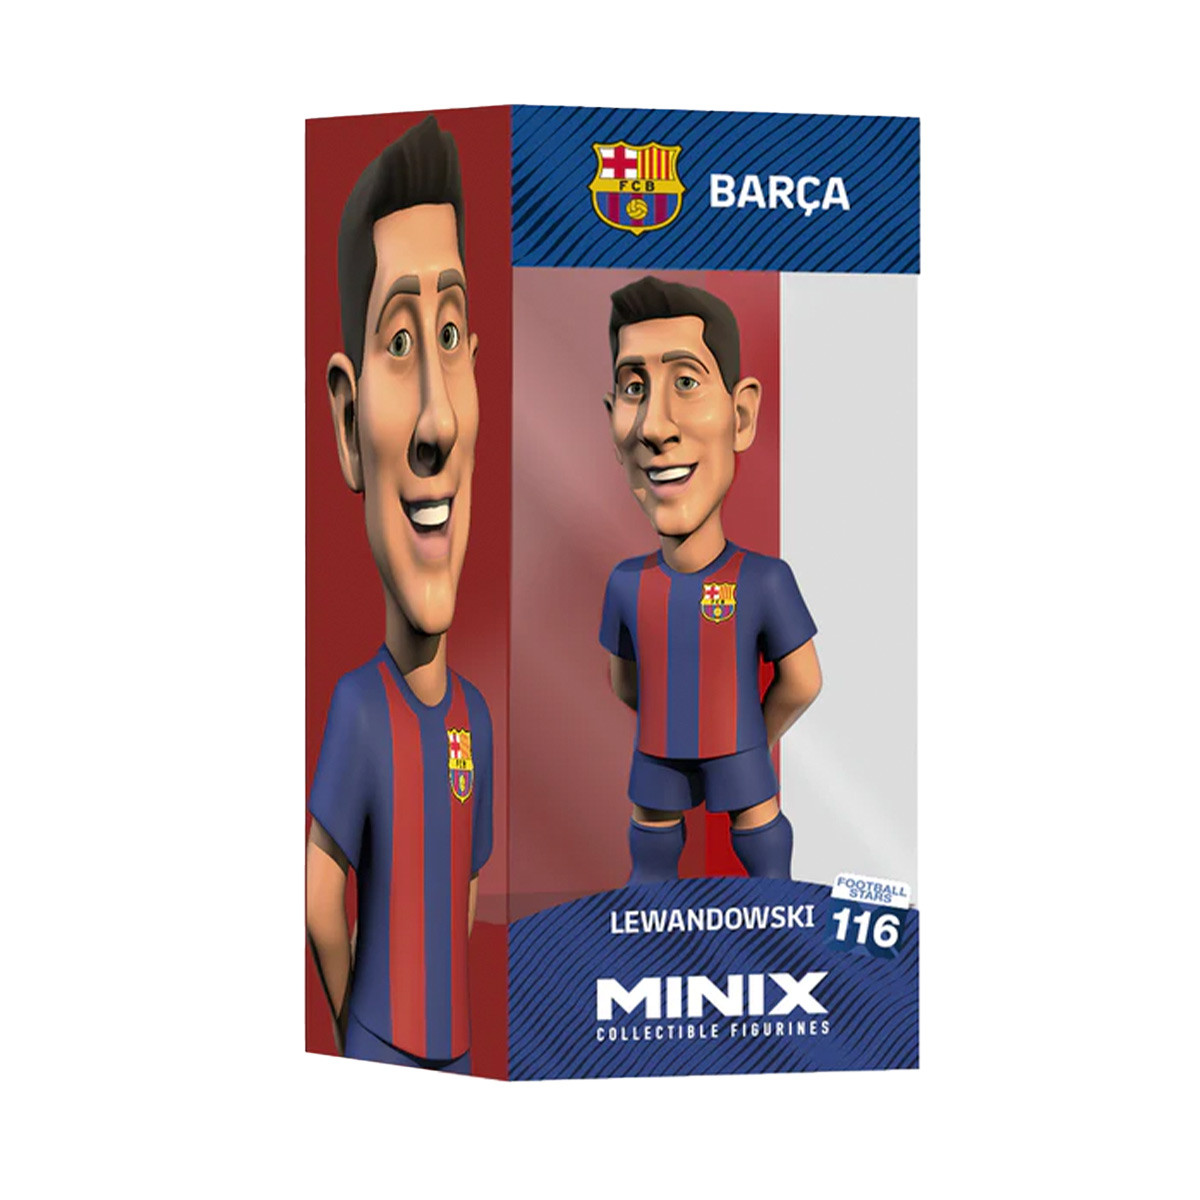 Minix Collectible Figurines, Football Toys Action Figure